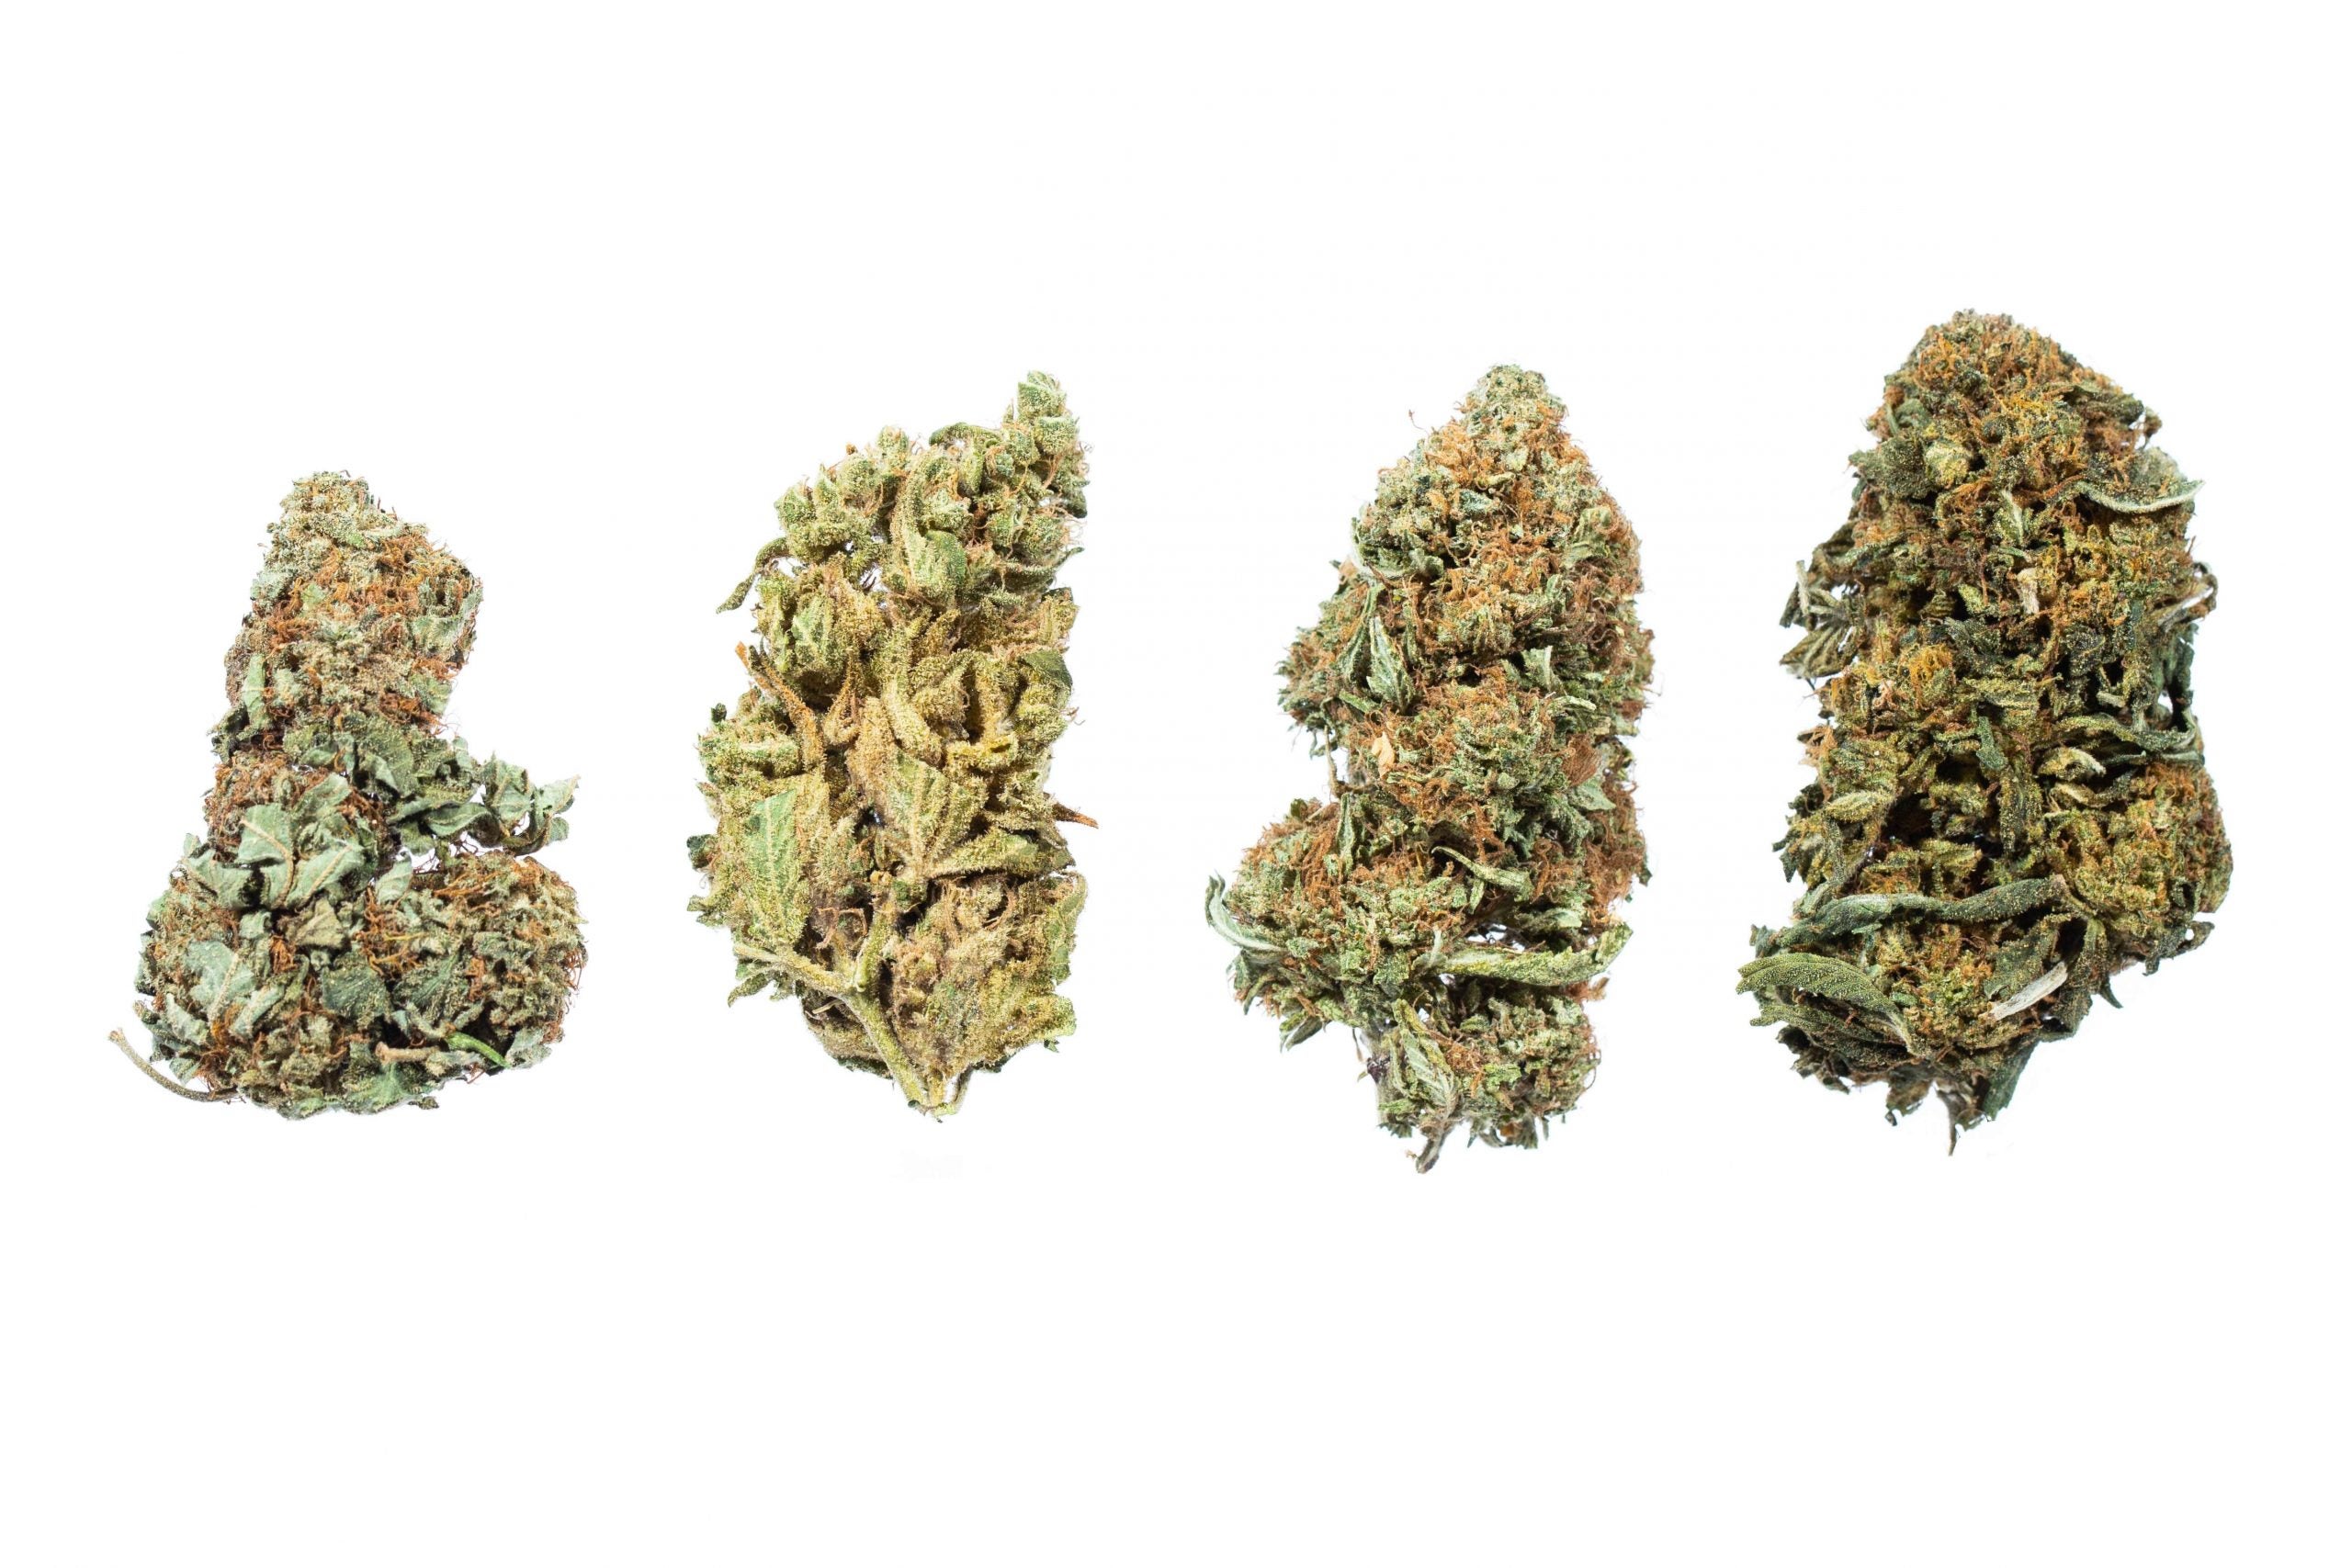 Flowers Mix and Match Strains